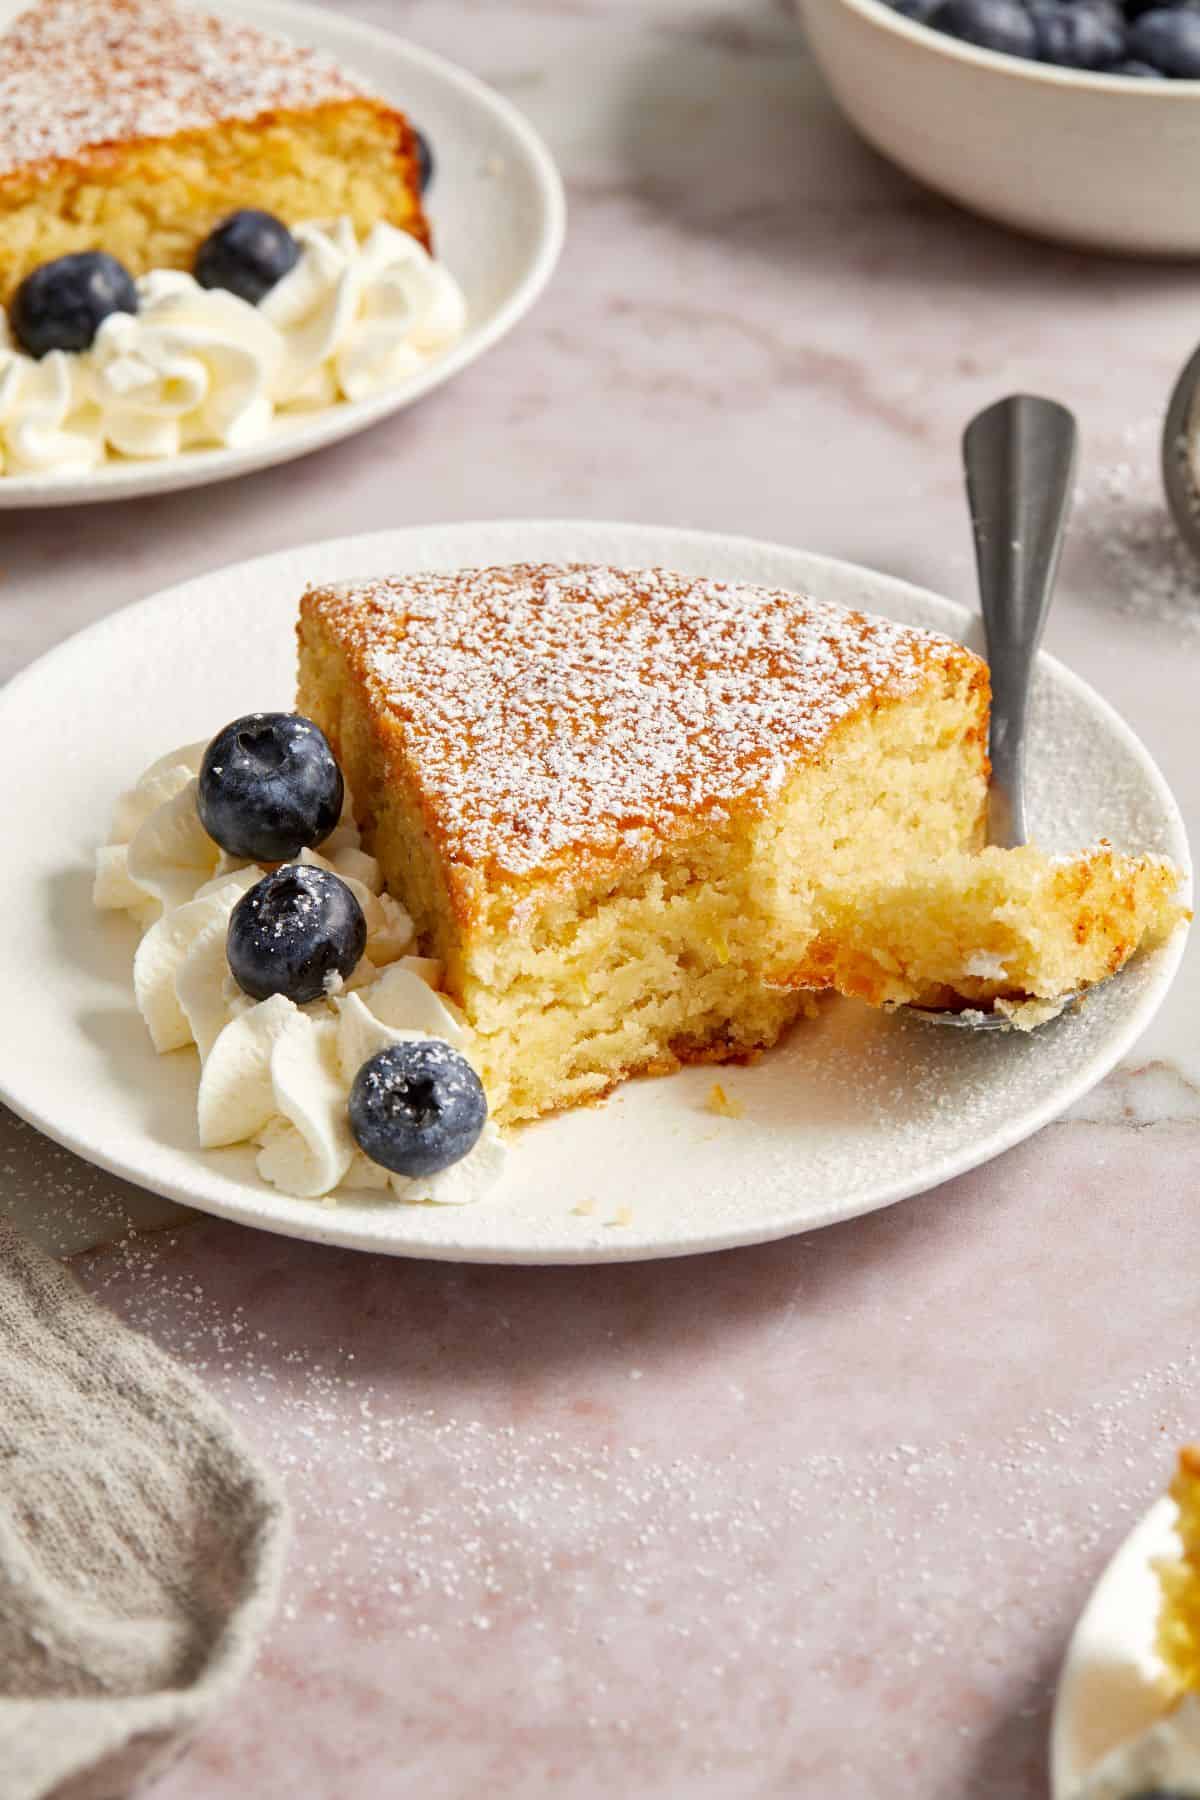 Slice of Almond Flour Cake with a fork cutting into the cake, with some fresh blueberries and whipped cream on the side.